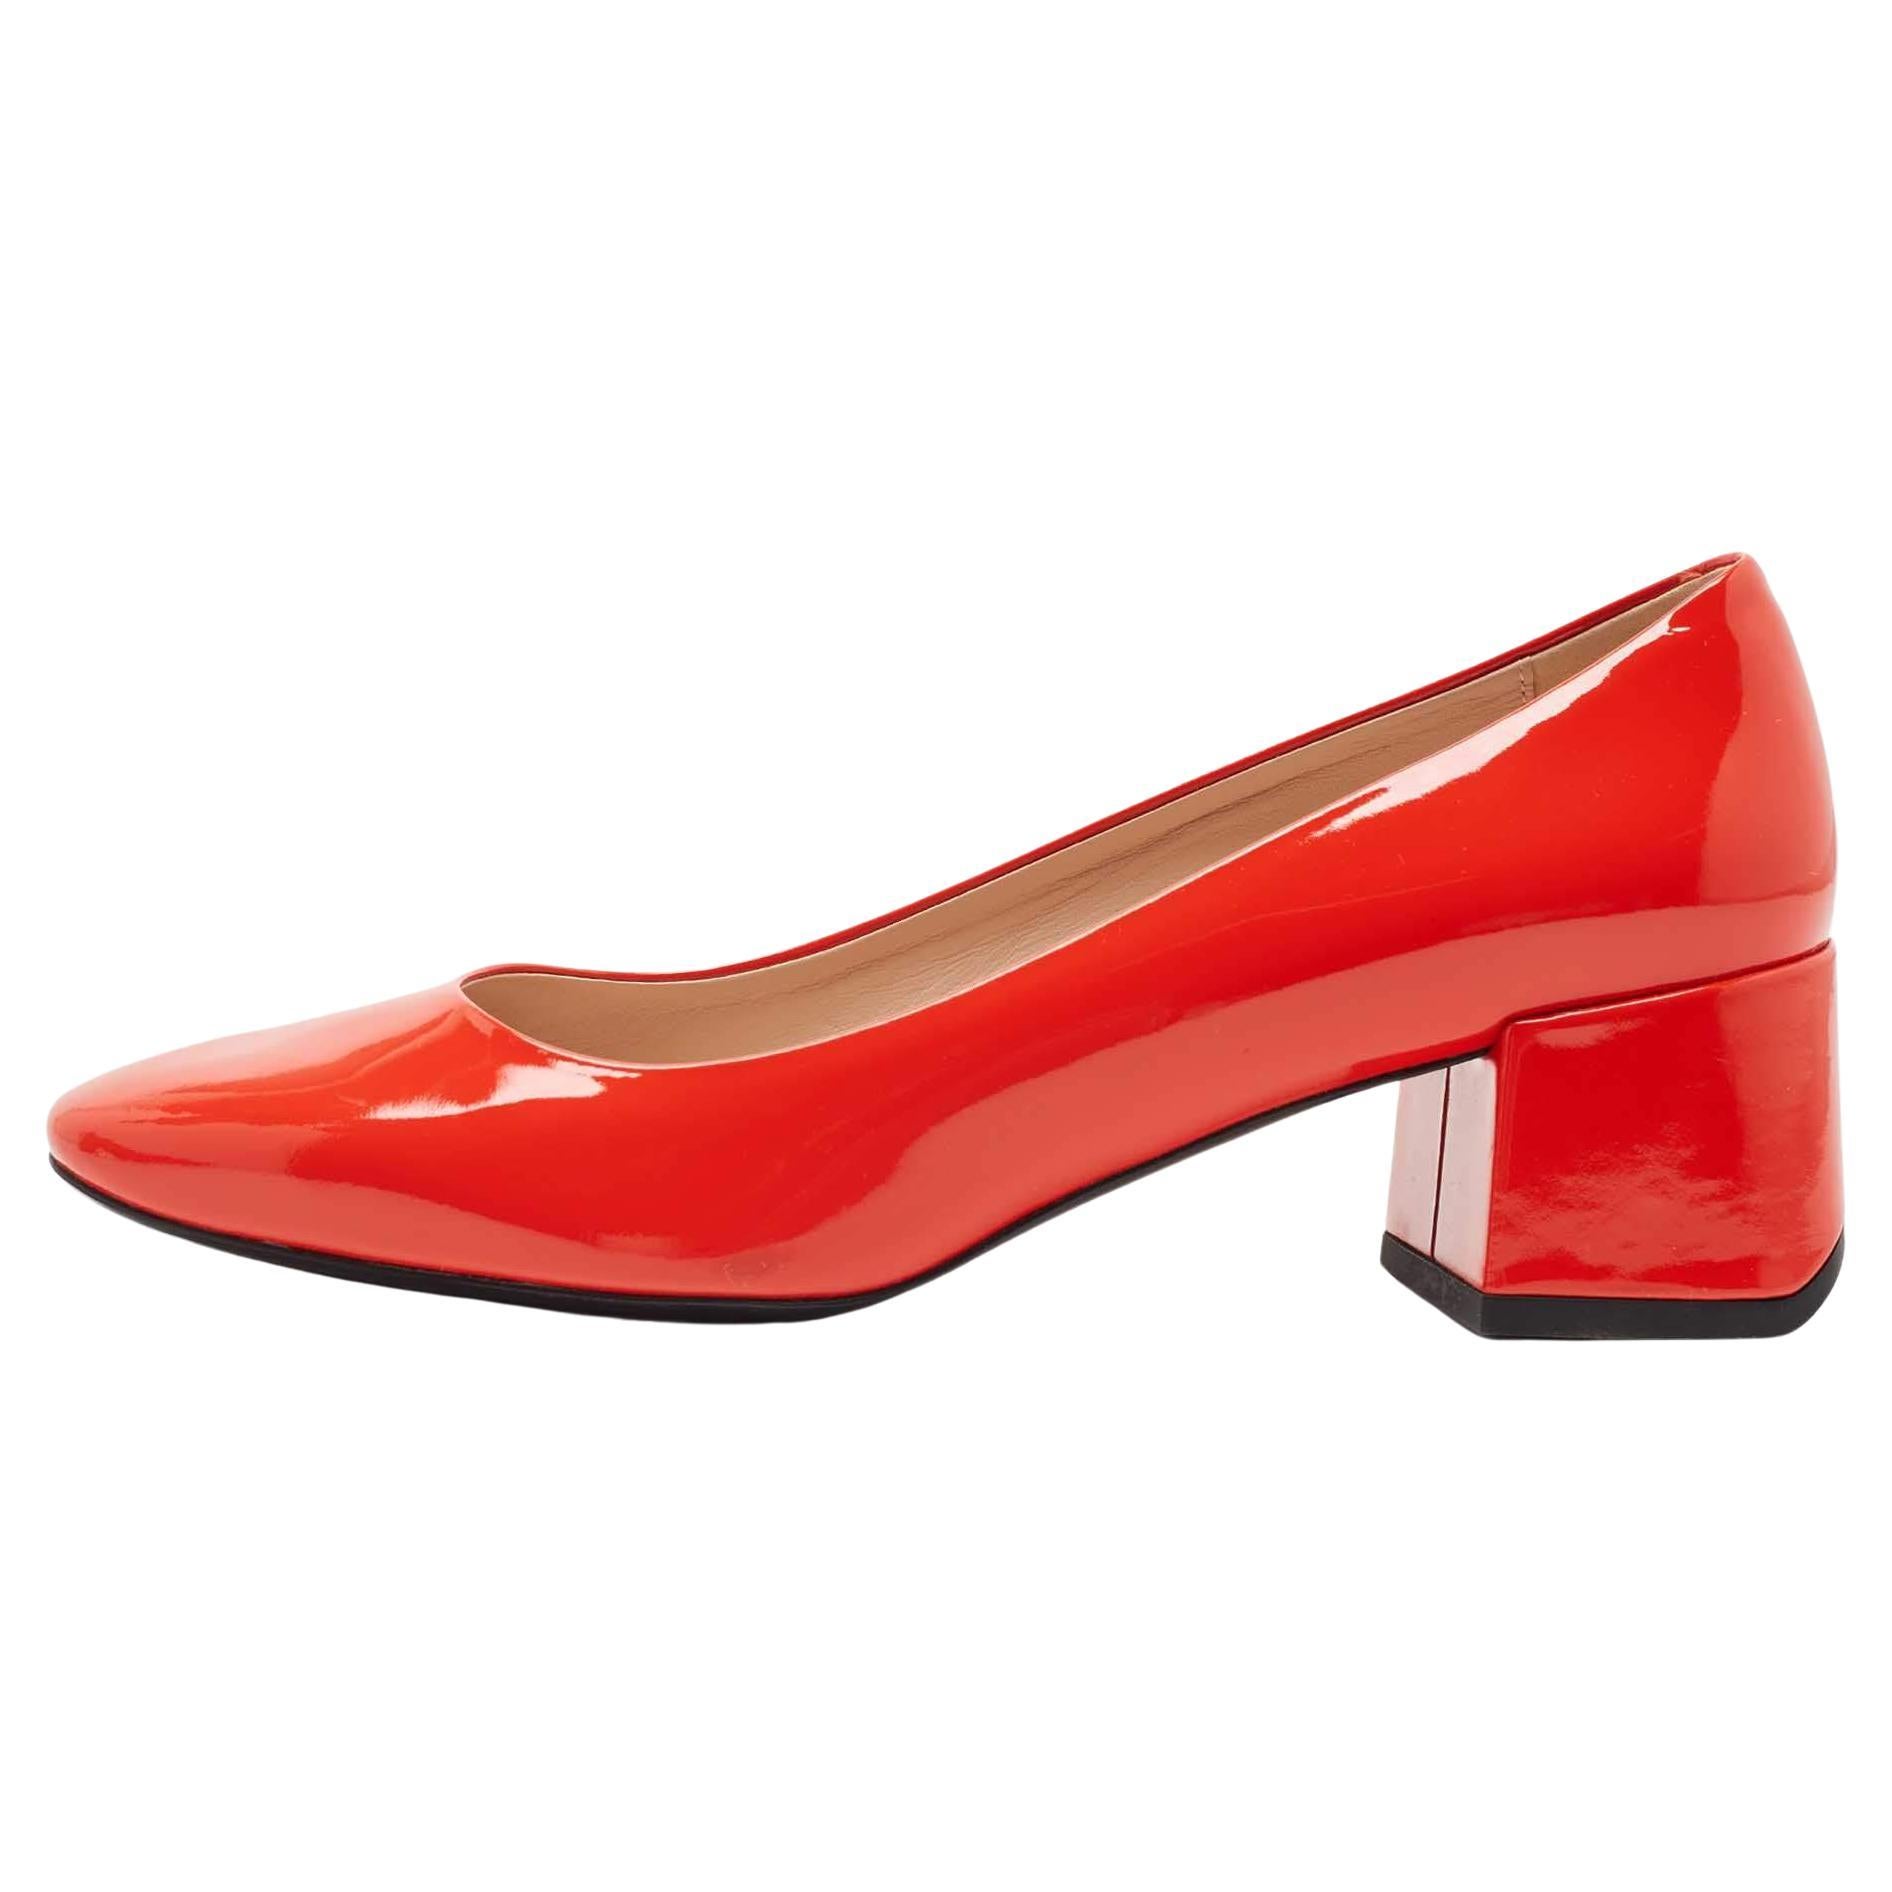 EDITH BLOCK HEEL SLINGBACK SHOES IN RED SUEDE – Where's That From UK